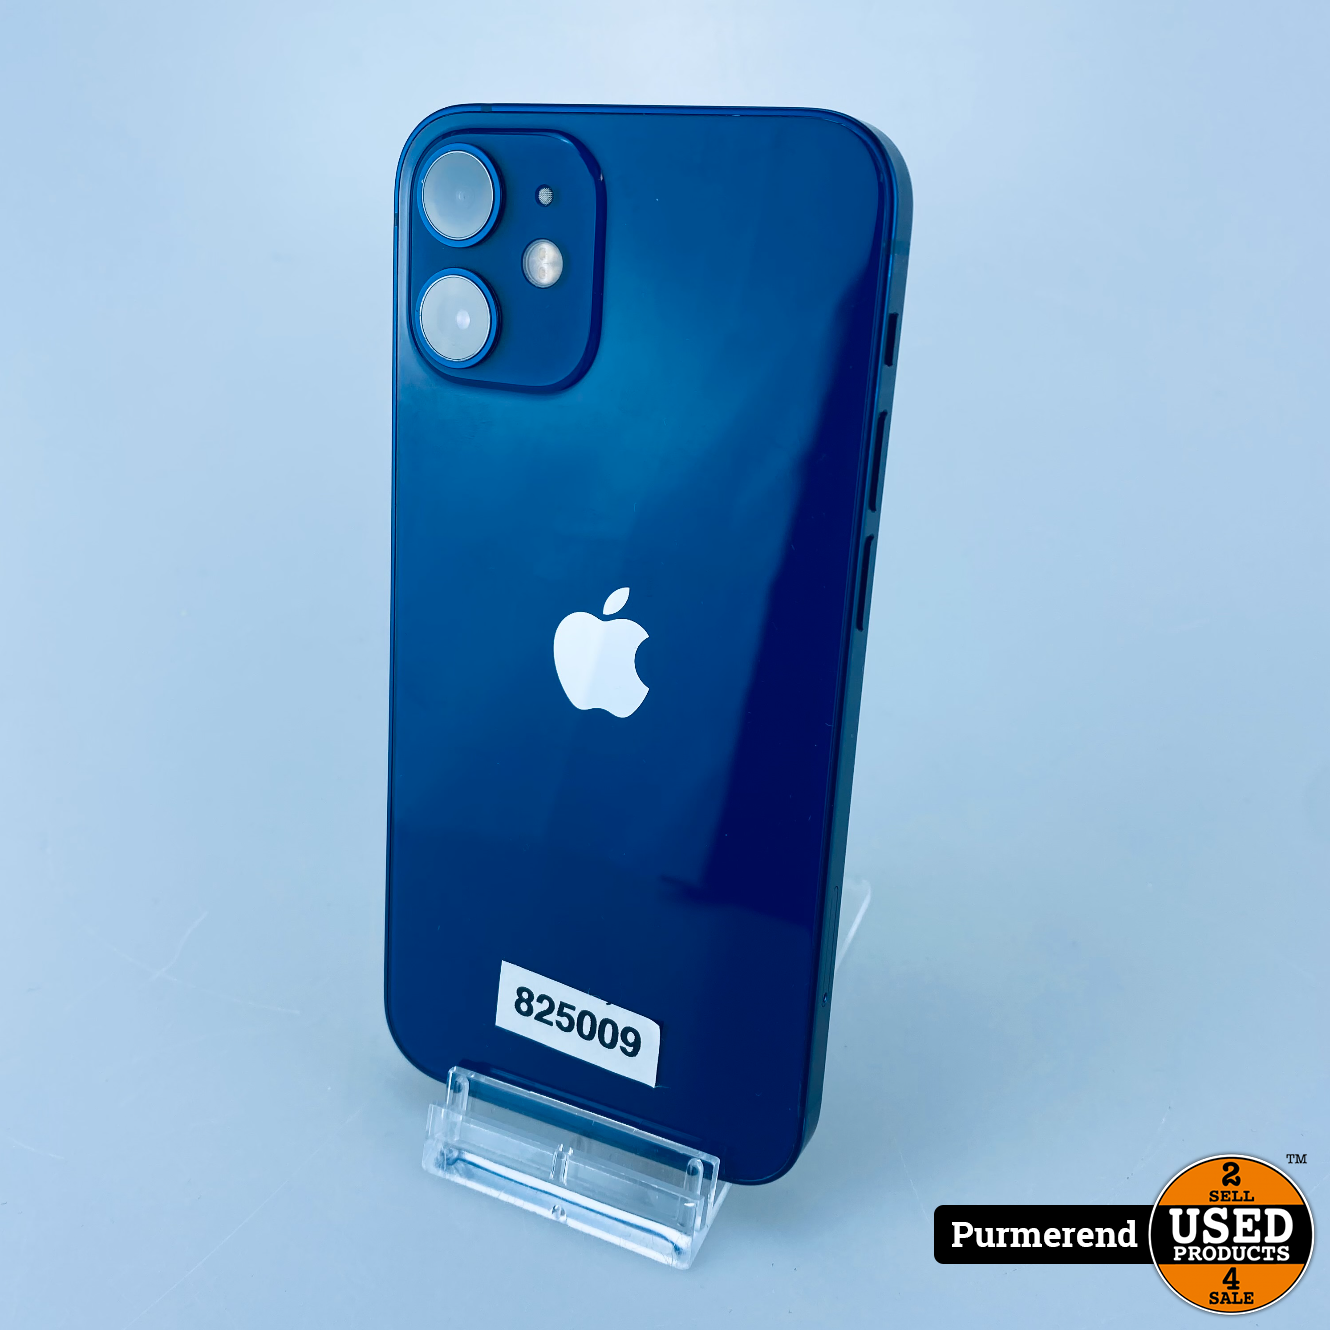 Apple iPhone 12 Mini 256GB Blauw - Used Products Purmerend